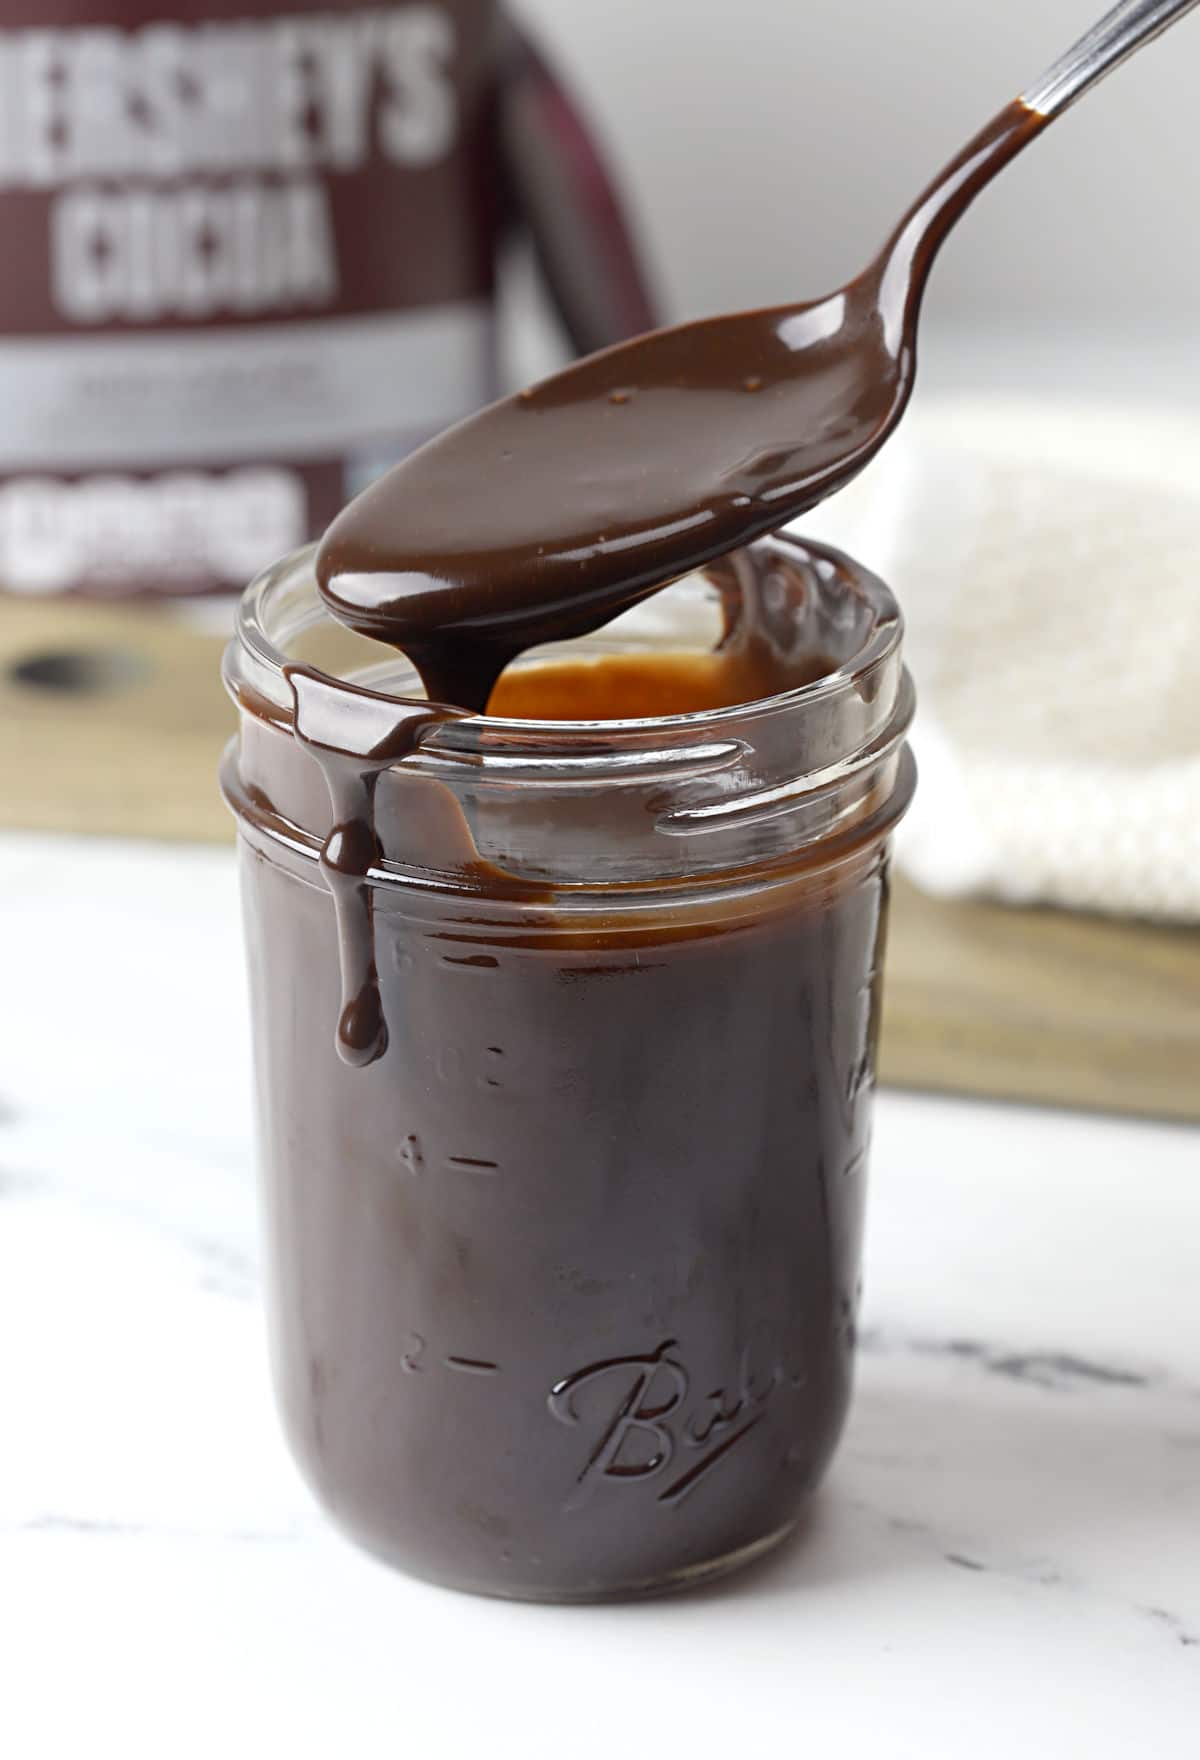 A metal spoon scooping hot fudge out of a glass jar.